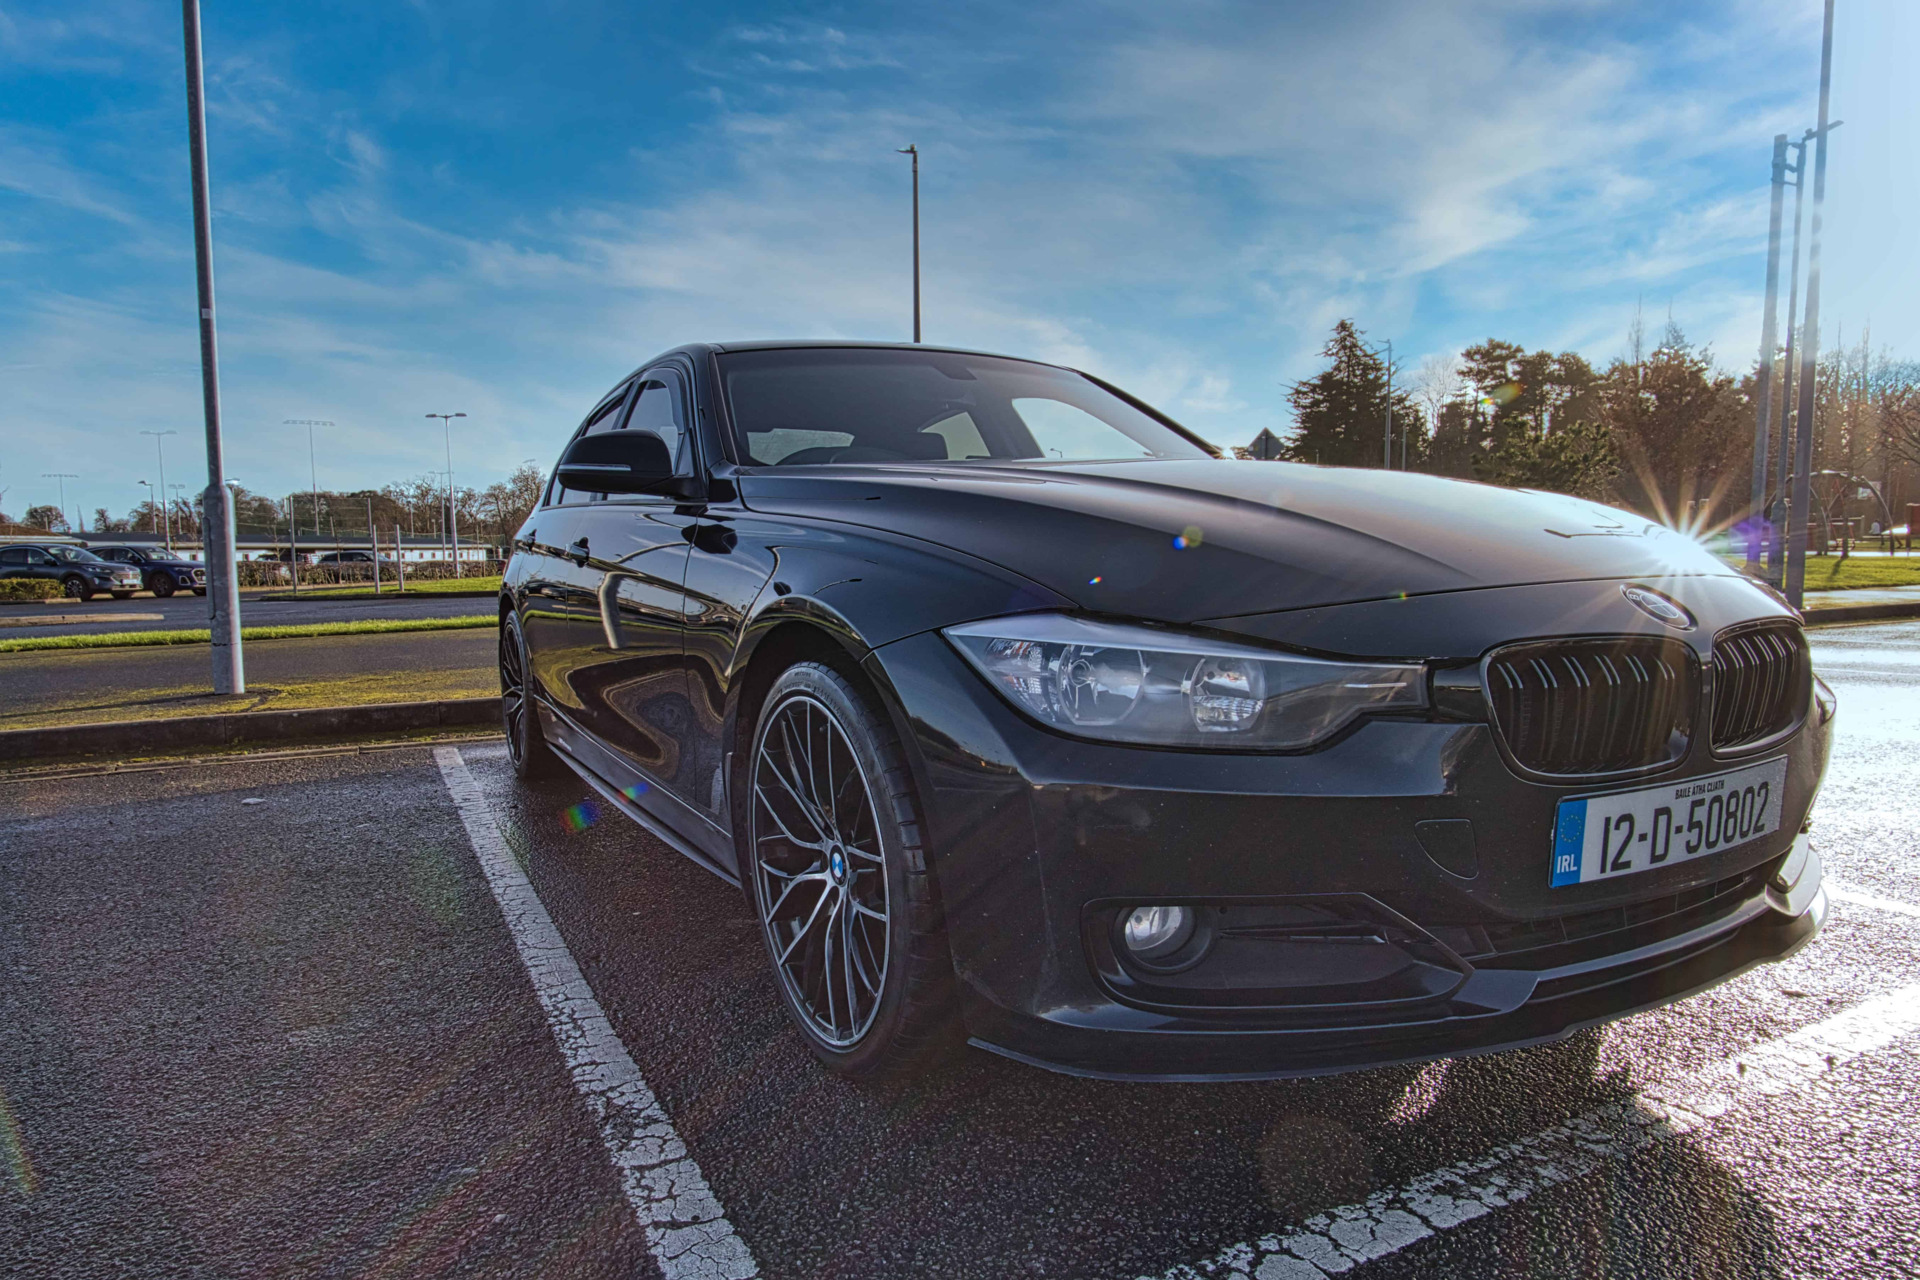 Used BMW 3 Series 2012 in Dublin